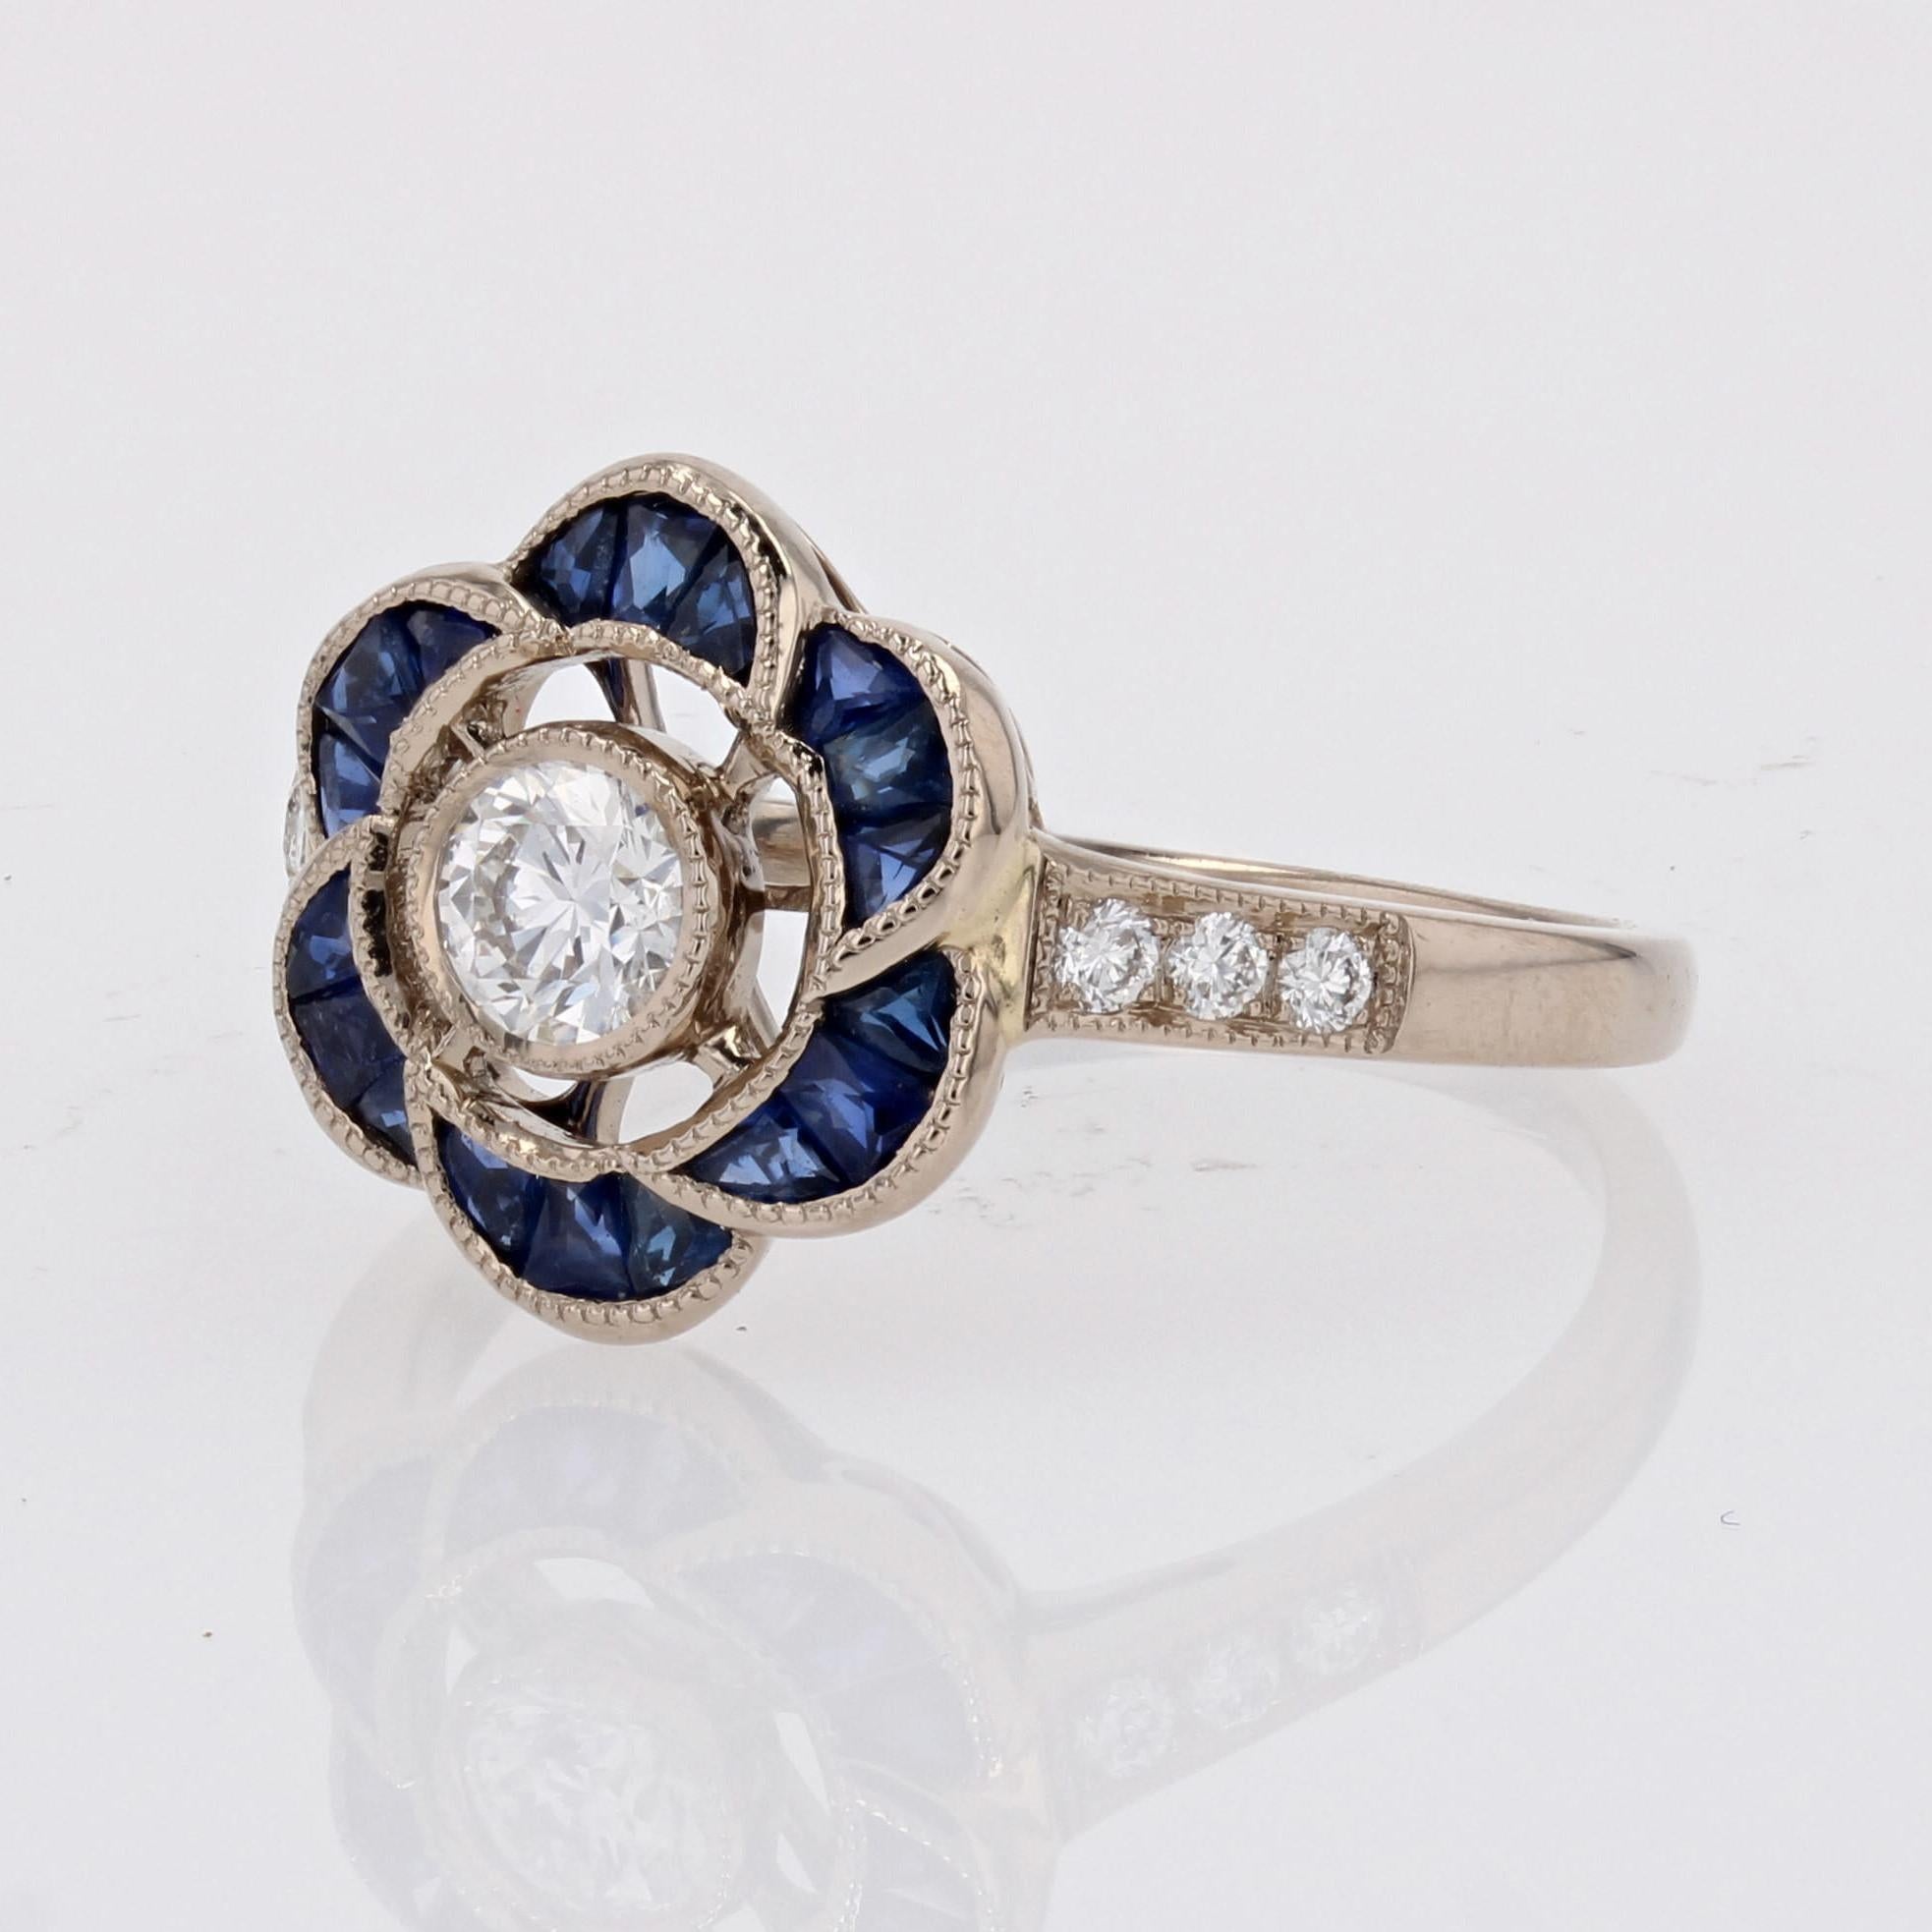 New Art Deco Style Calibrated Sapphires Diamonds 18 K White Gold Flower Ring For Sale 3